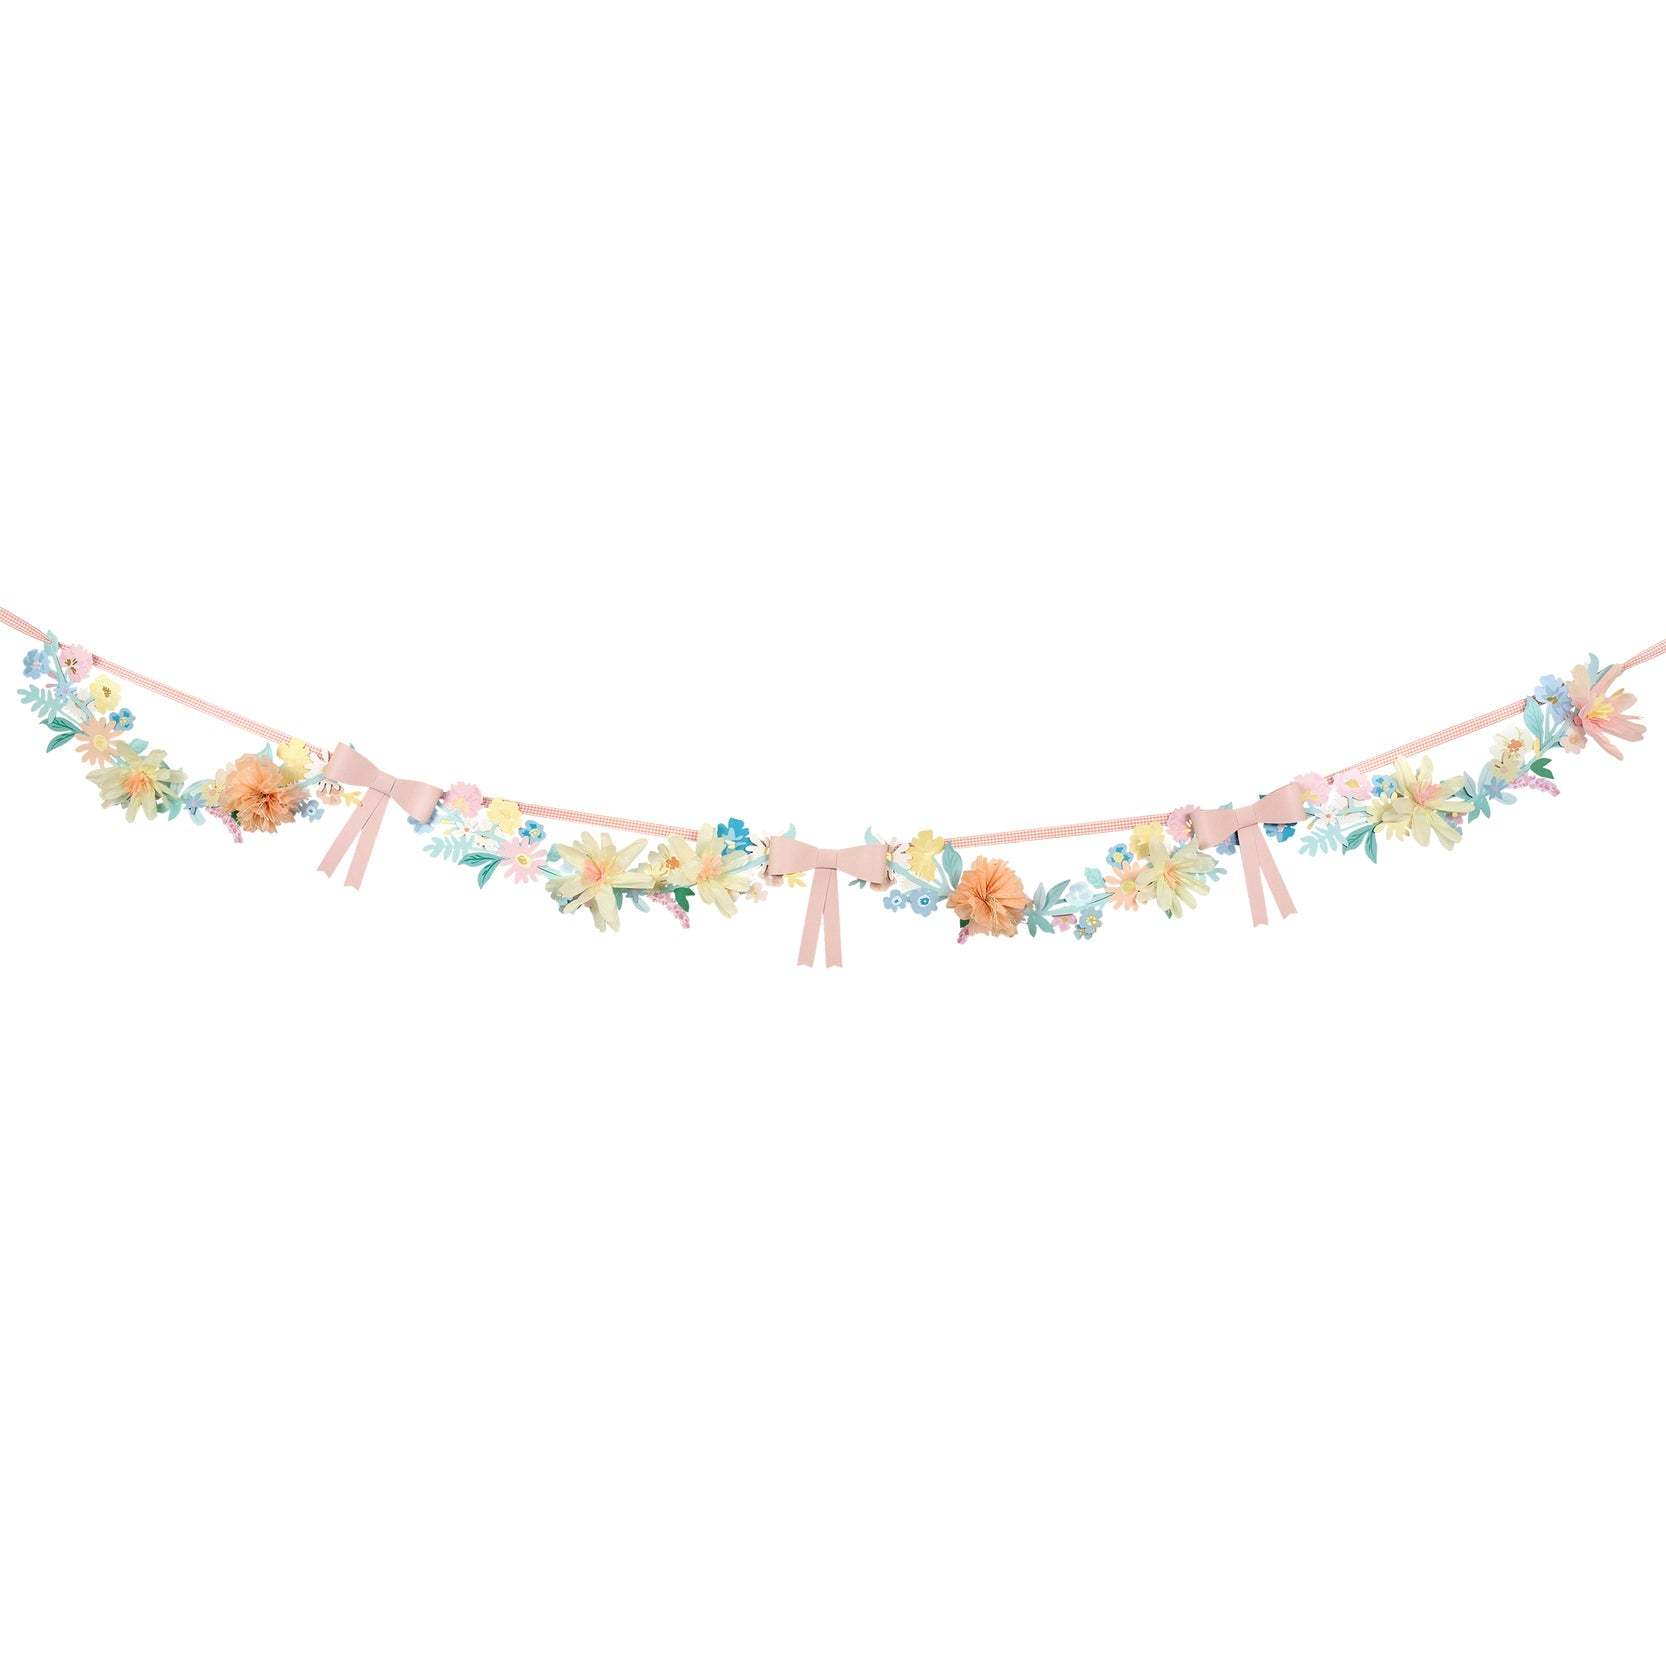 A Meri Meri Flower &amp; Bow Garland adorned with a delightful mix of beautiful flowers and charming bows.